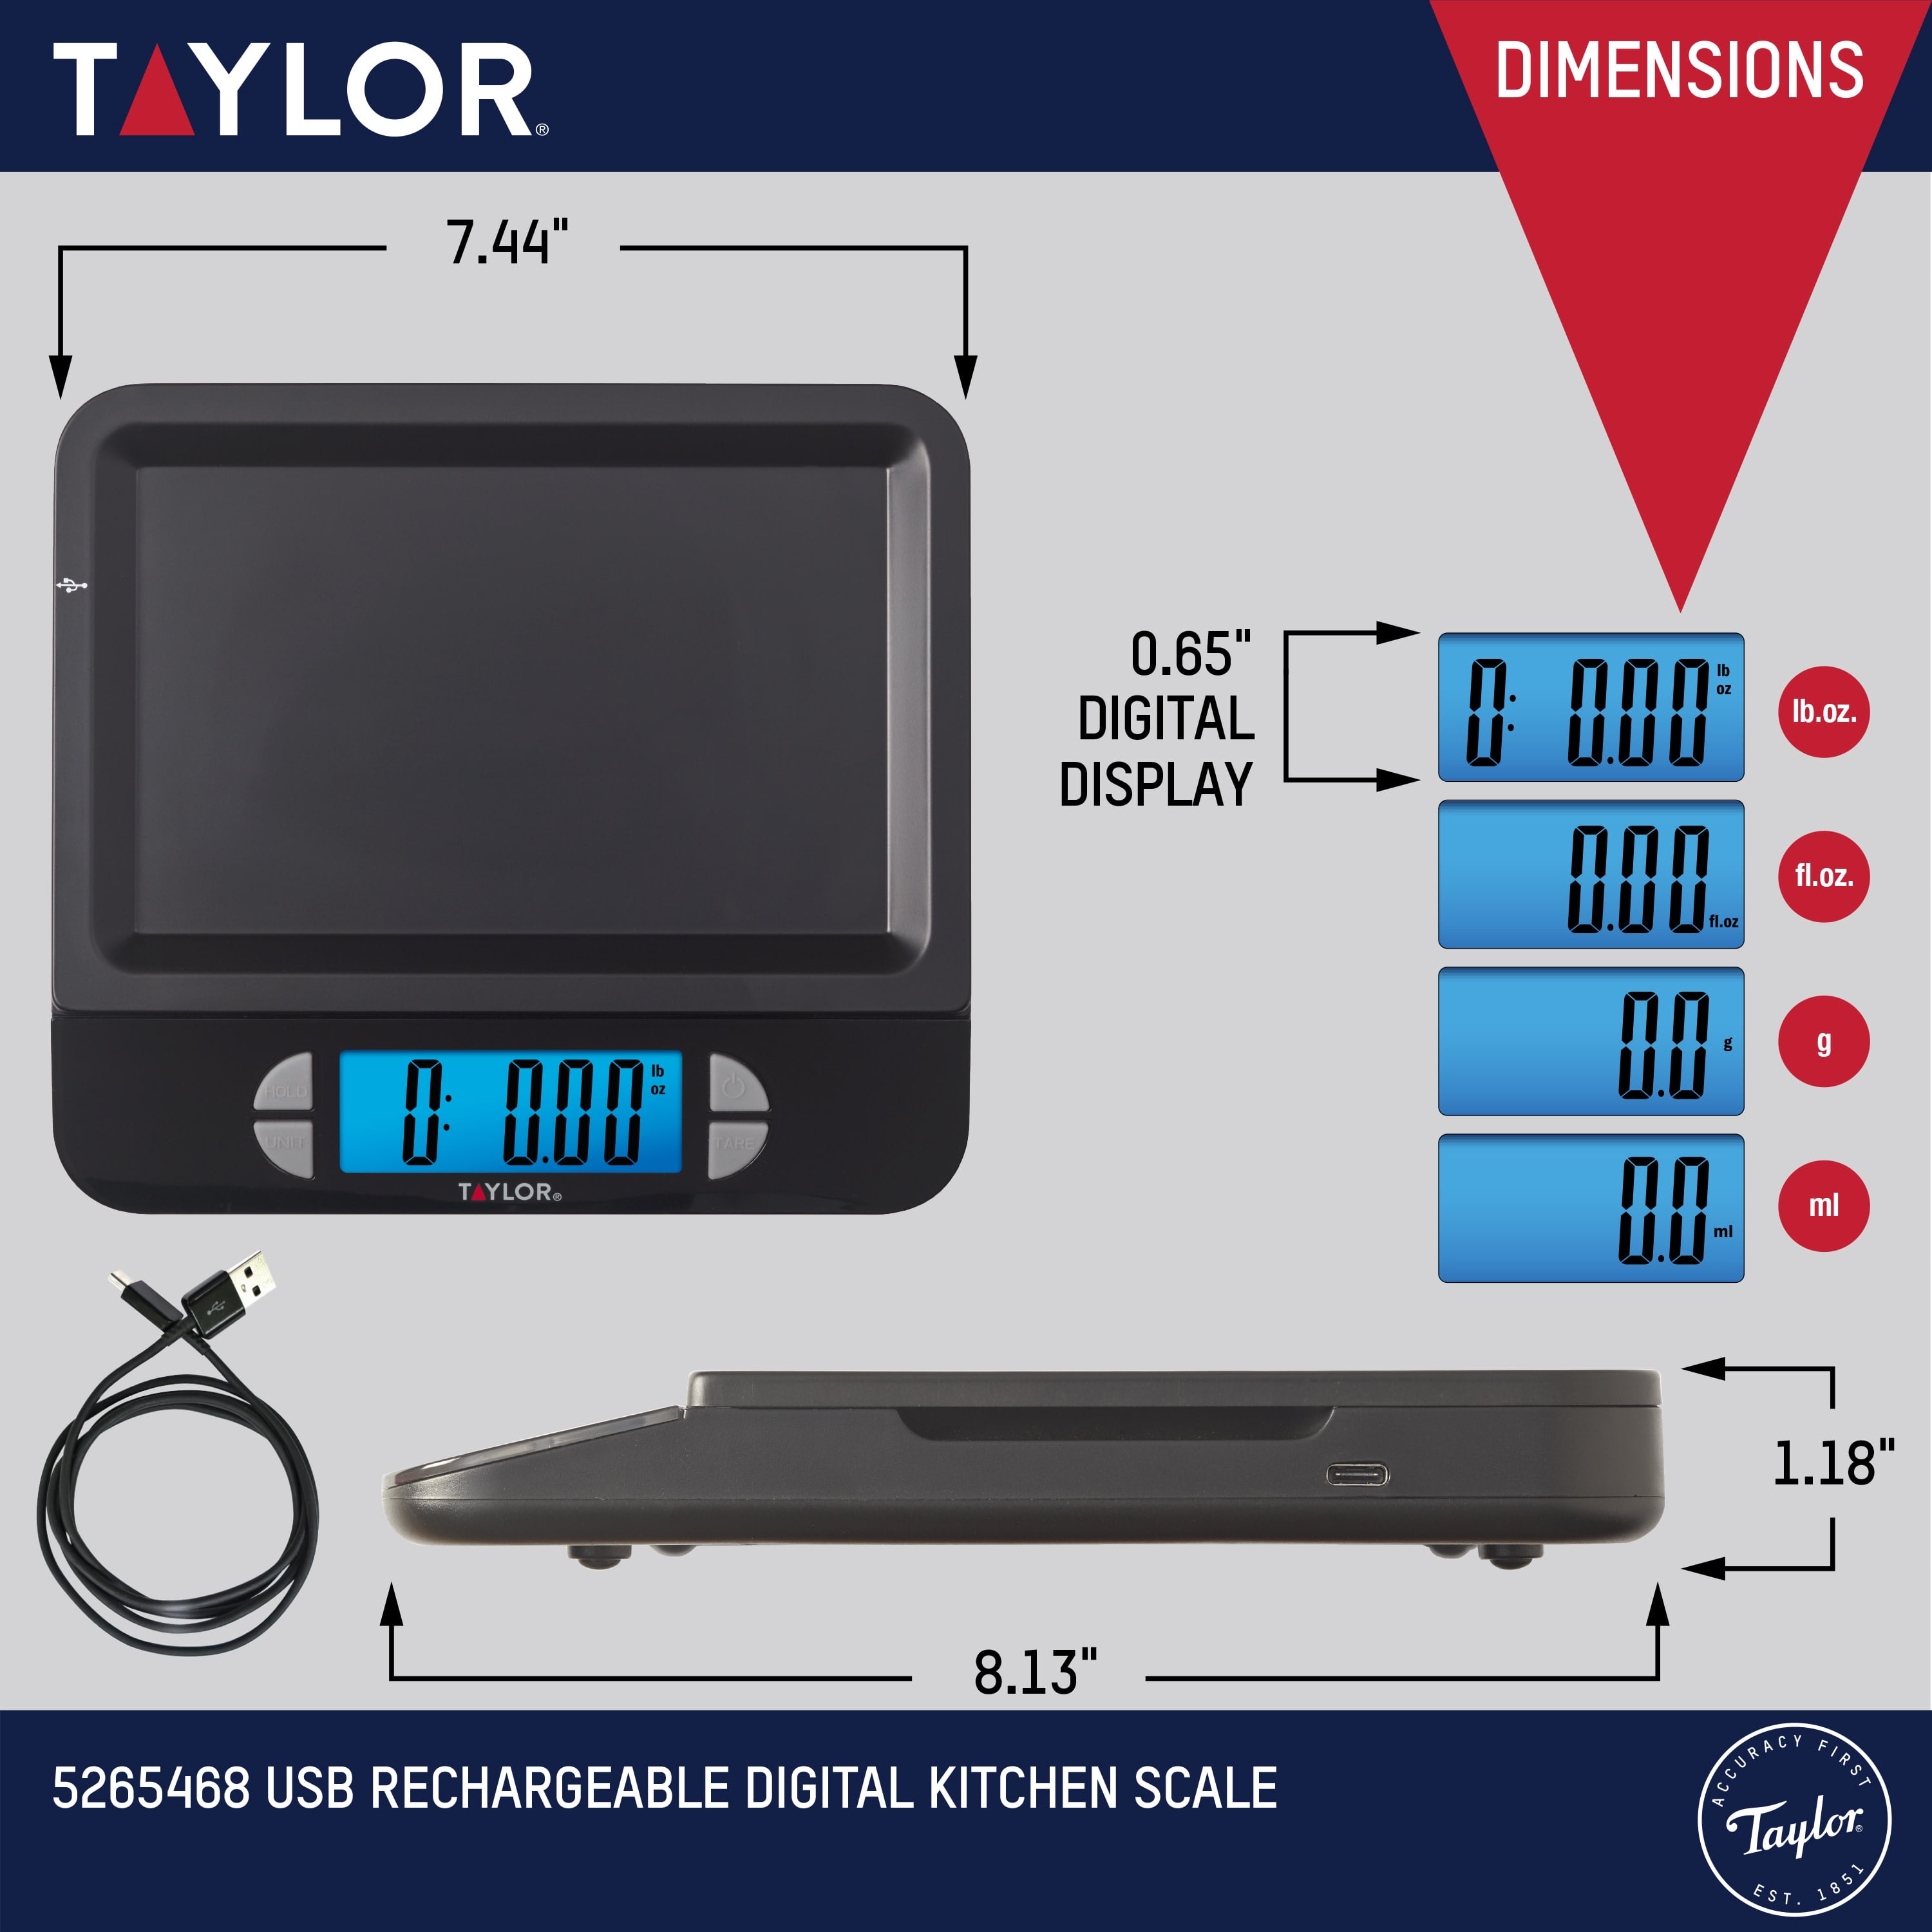 Taylor 11 lb. Capacity Digital Food Scale at Tractor Supply Co.